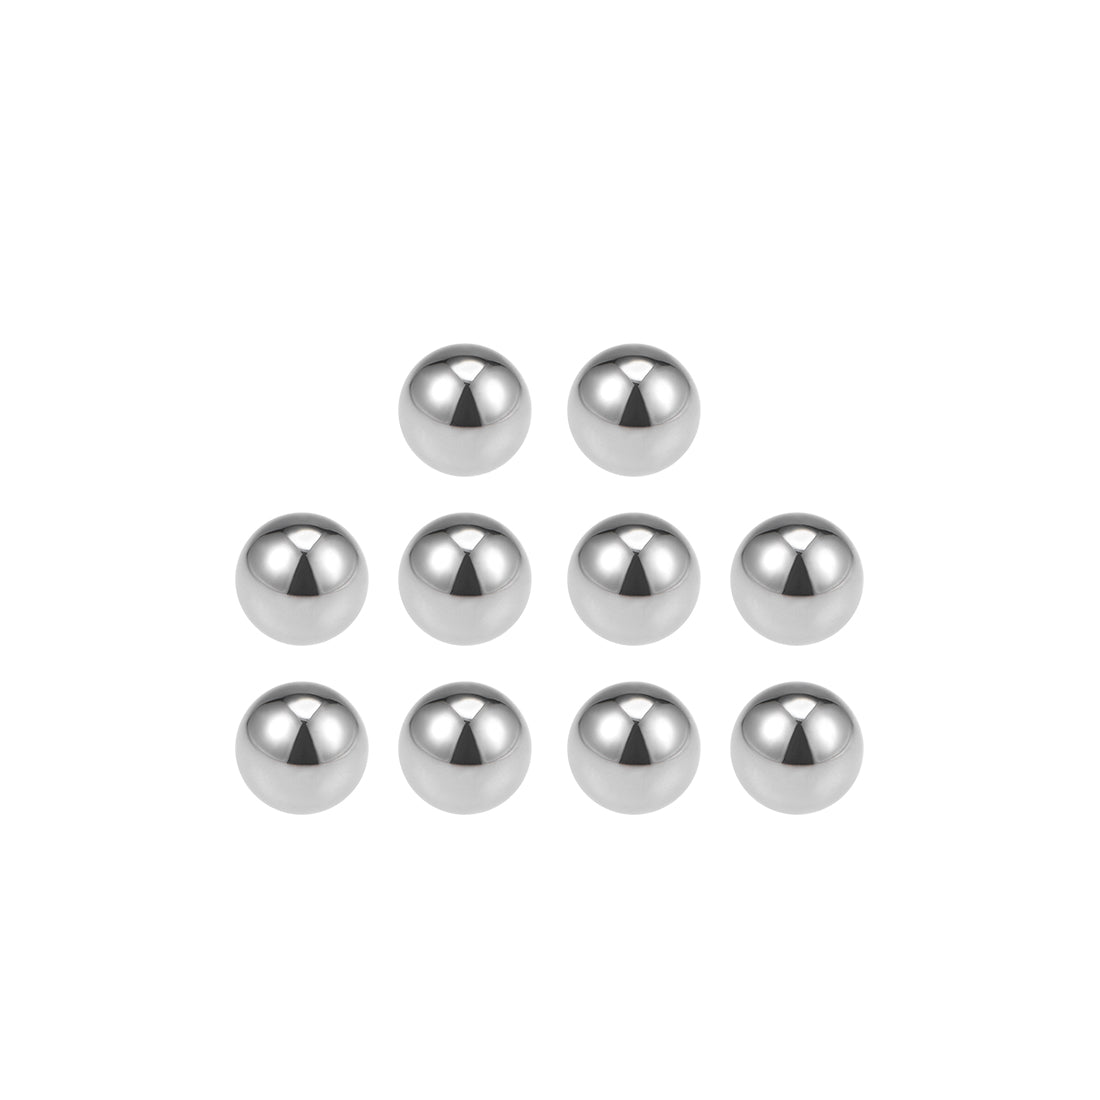 uxcell Uxcell Precision Balls 3/16" Solid Chrome Steel G25 for Ball Bearing Wheel 50pcs